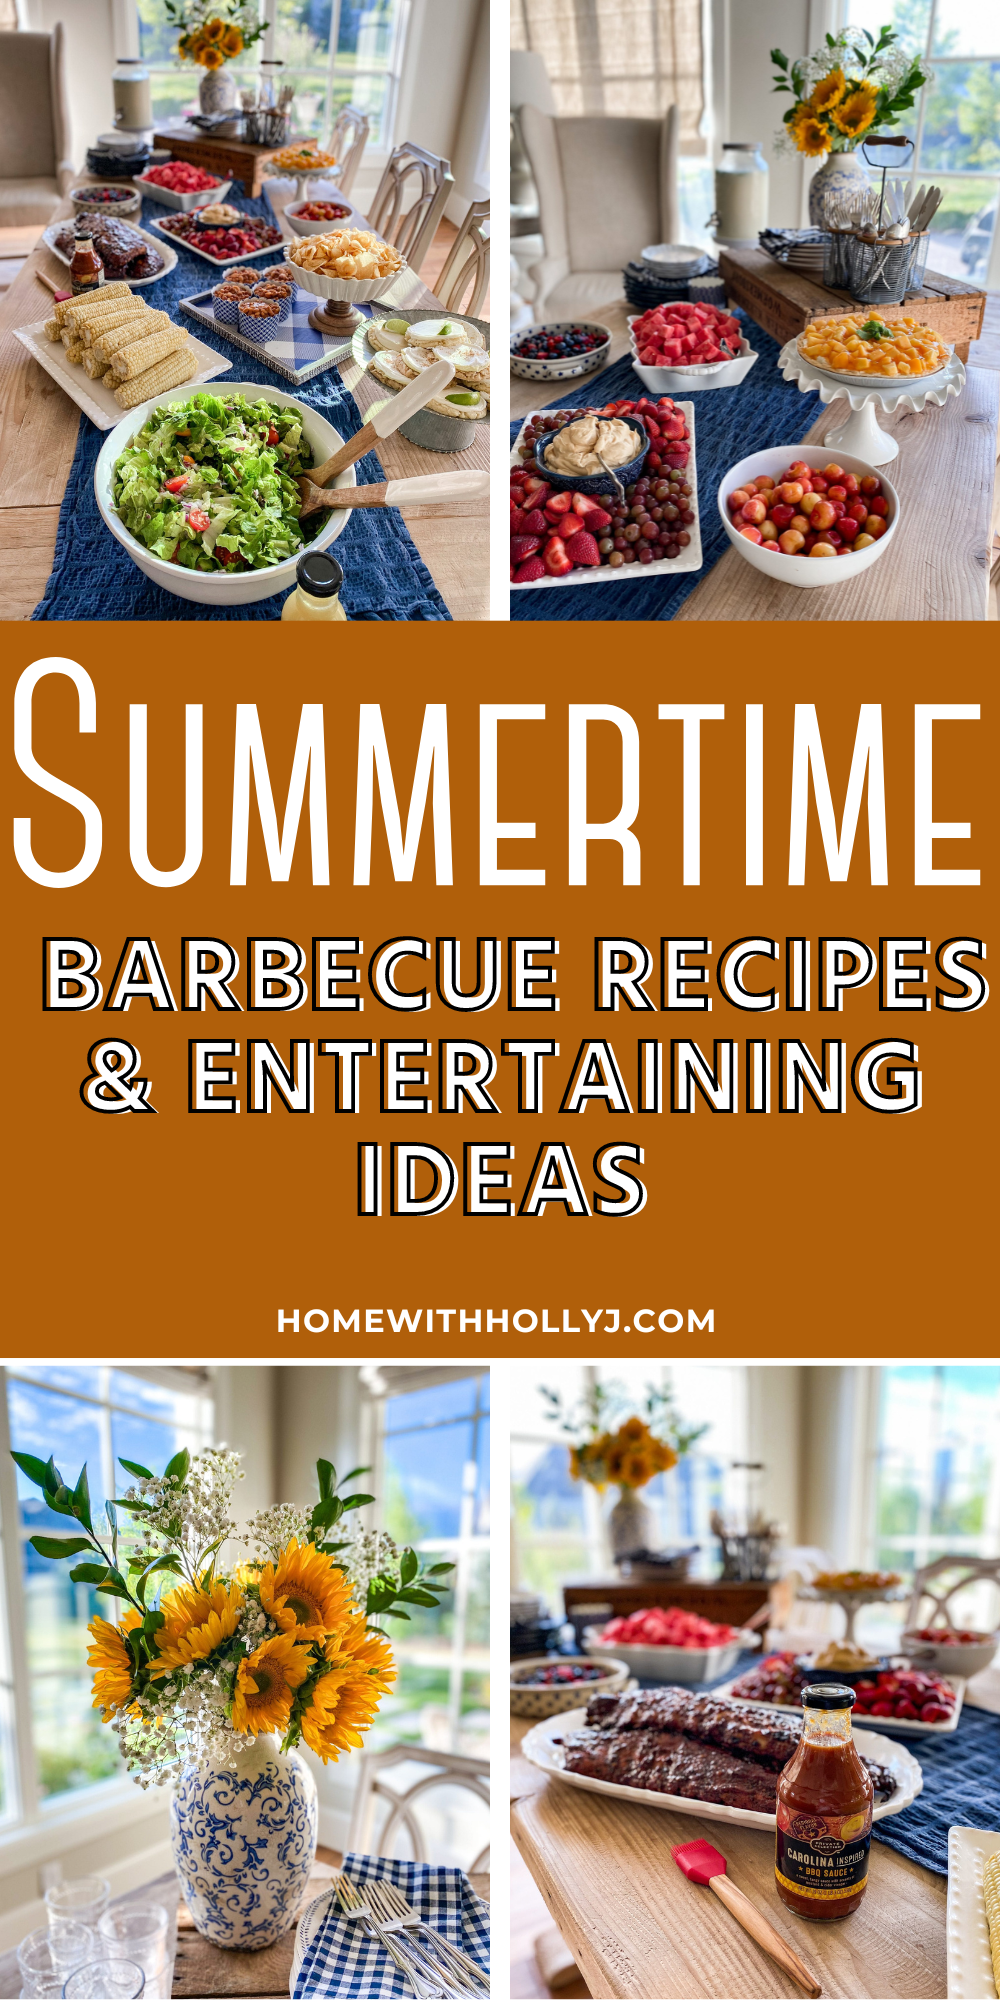 Sharing my all-time favorite summertime barbecue recipes including fresh peach pie and a beautiful tablescape for entertaining guests